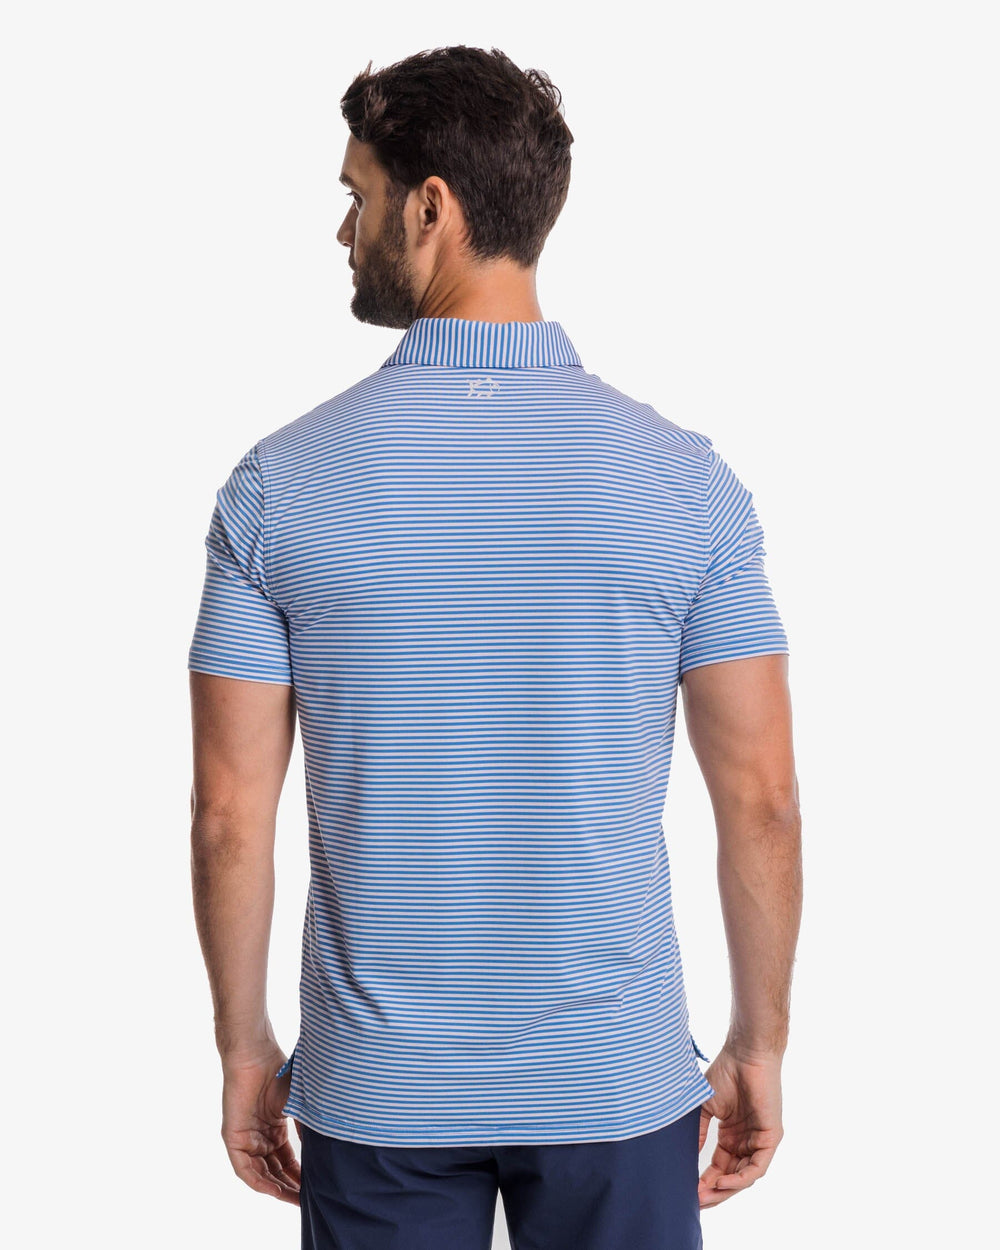 The back view of the Southern Tide Shores Stripe brrr eeze Performance Polo Shirt by Southern Tide - Rose Blush